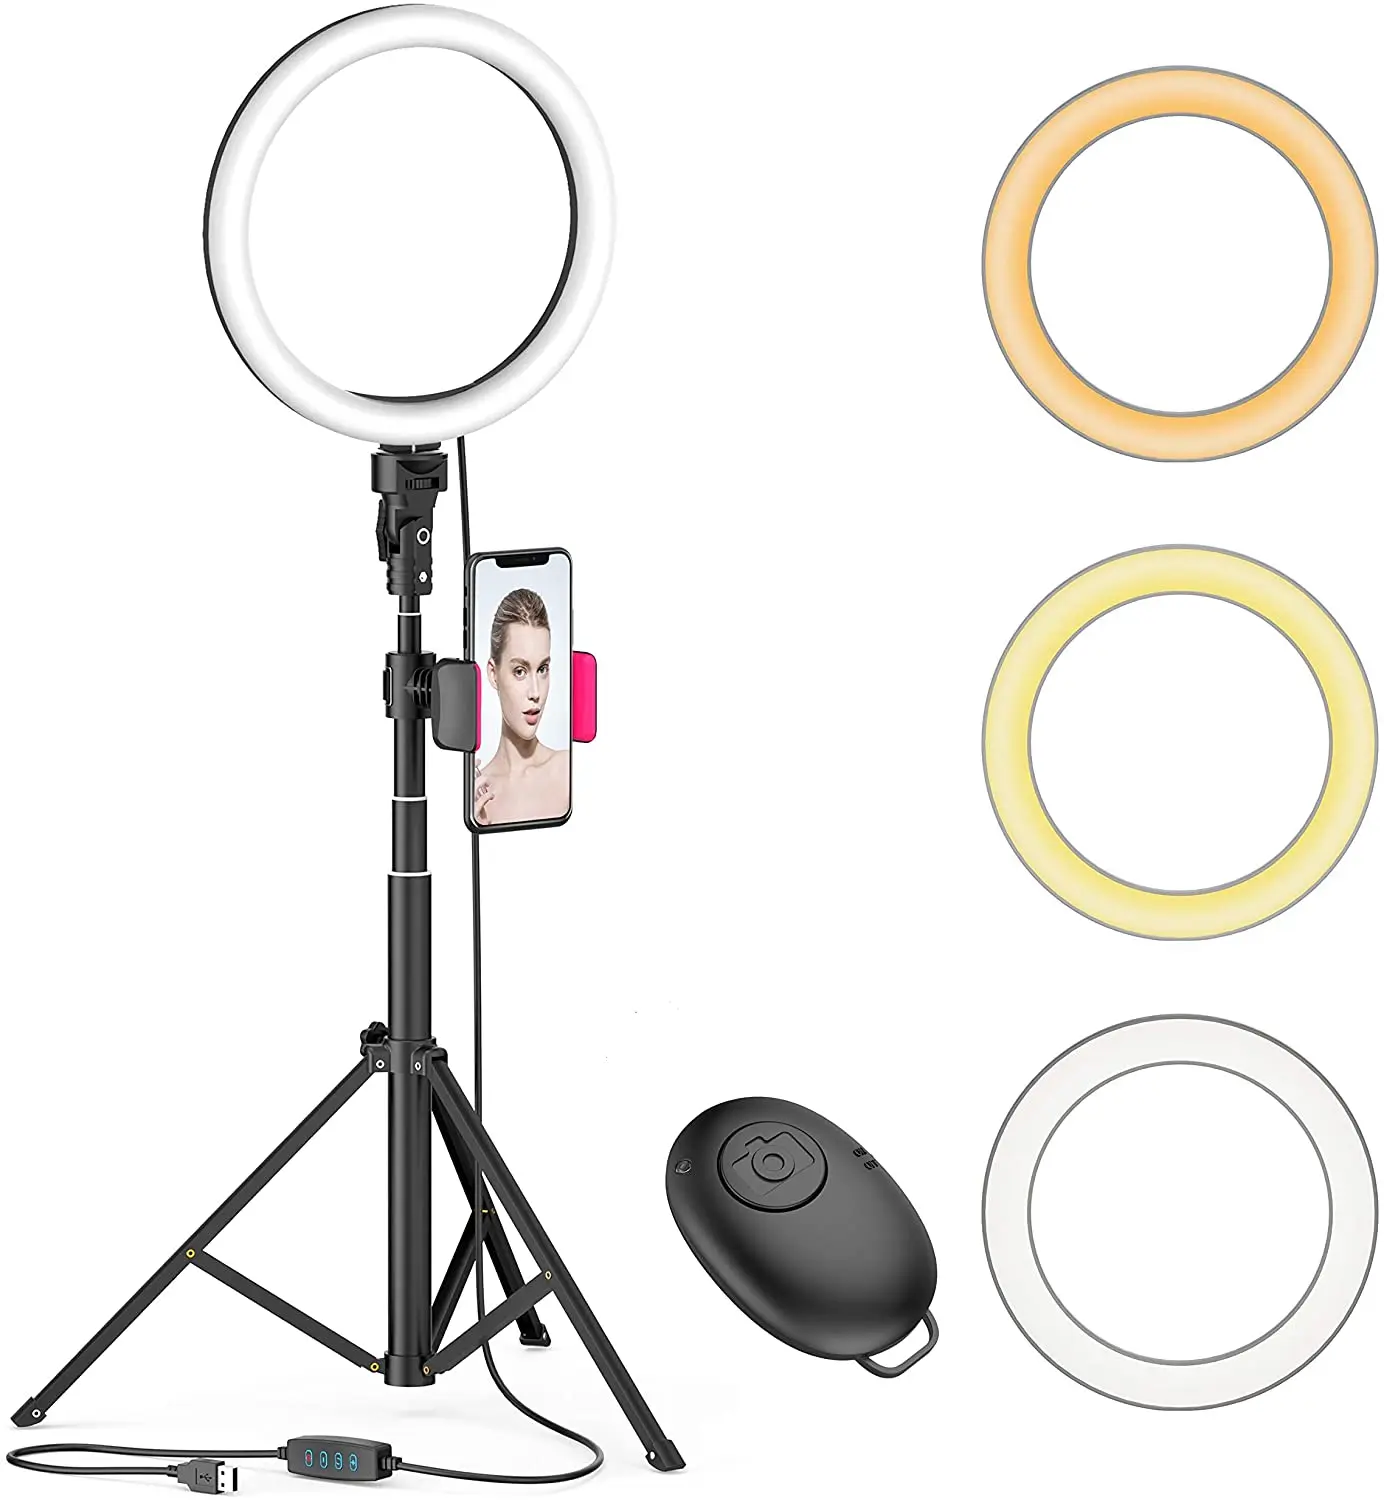 Bowens TONOR 12" Large Selfie Ring Light with Stand for Phone LED Circle Light Kit 